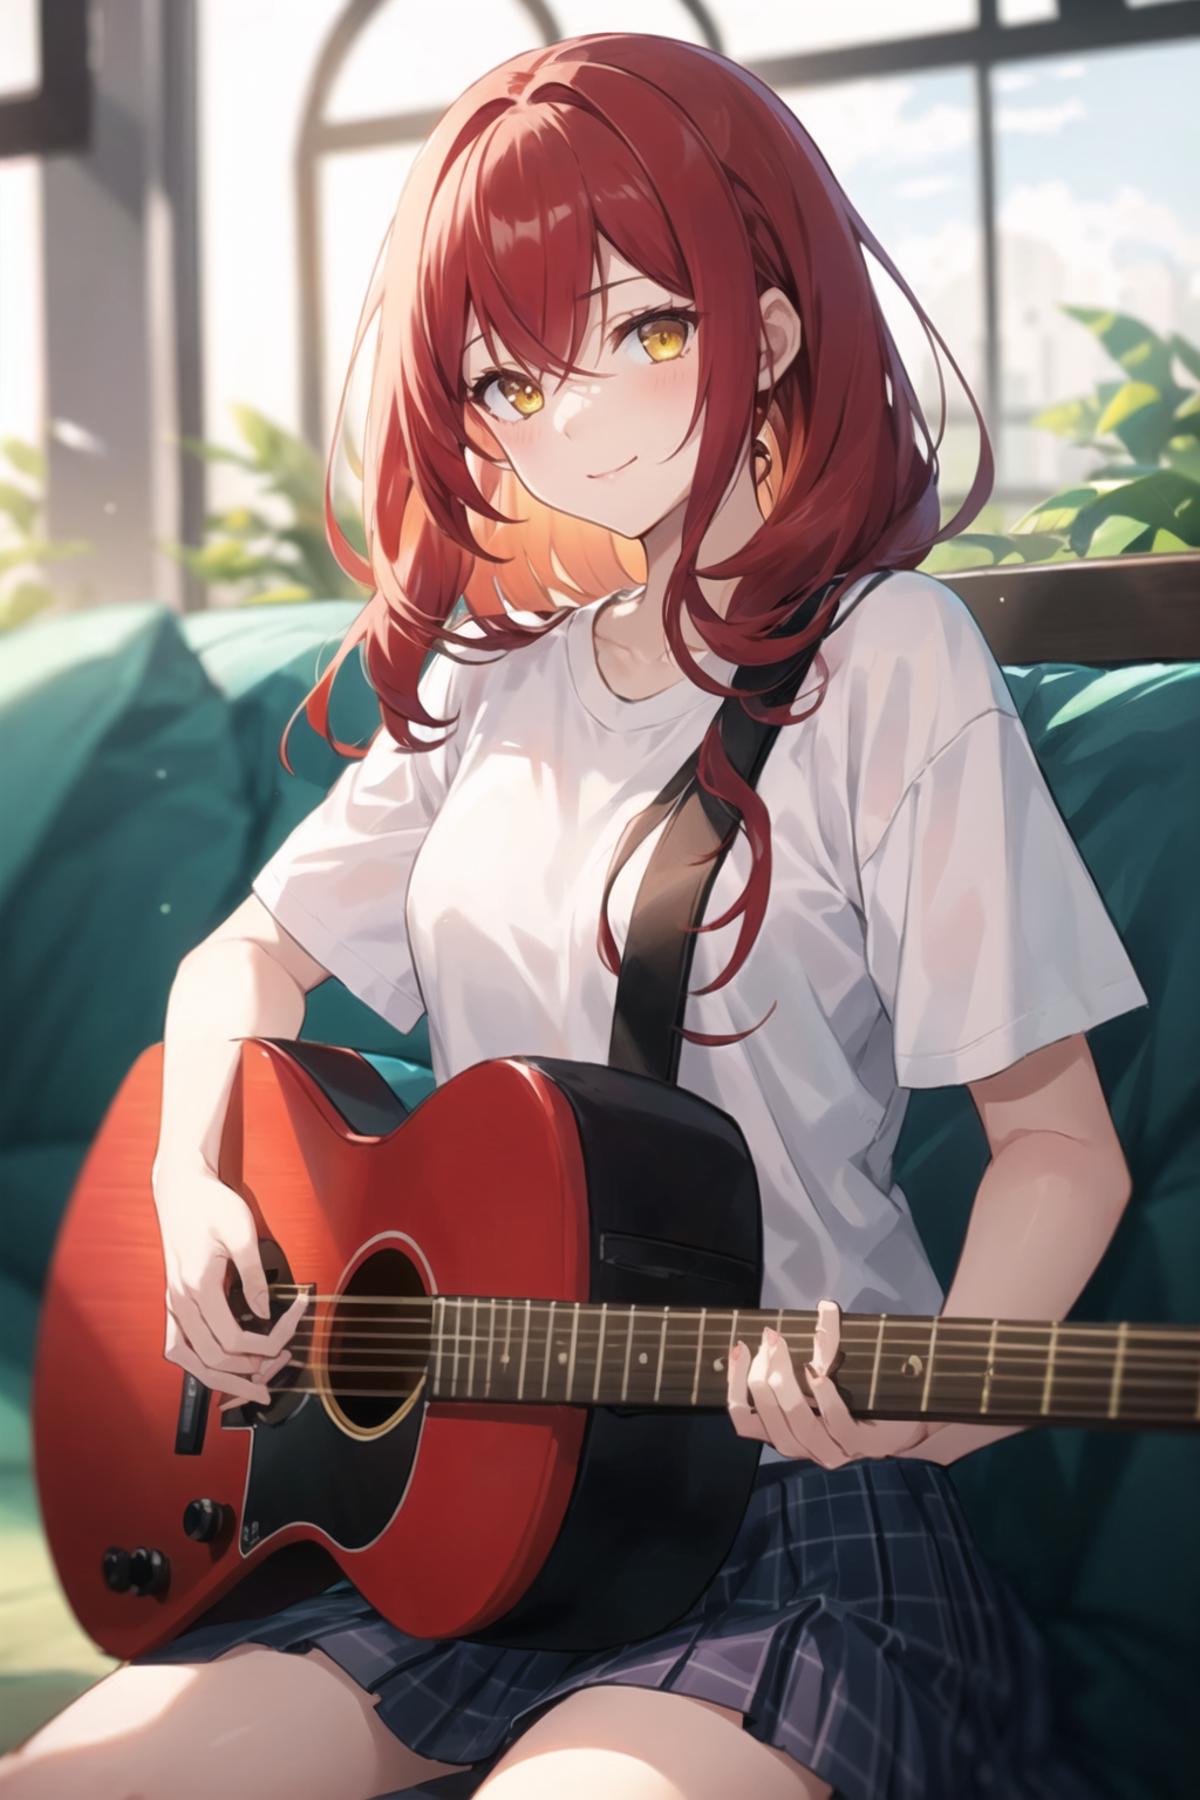 [OpenPose + Lineart] Playing Guitar image by BlazzzX4